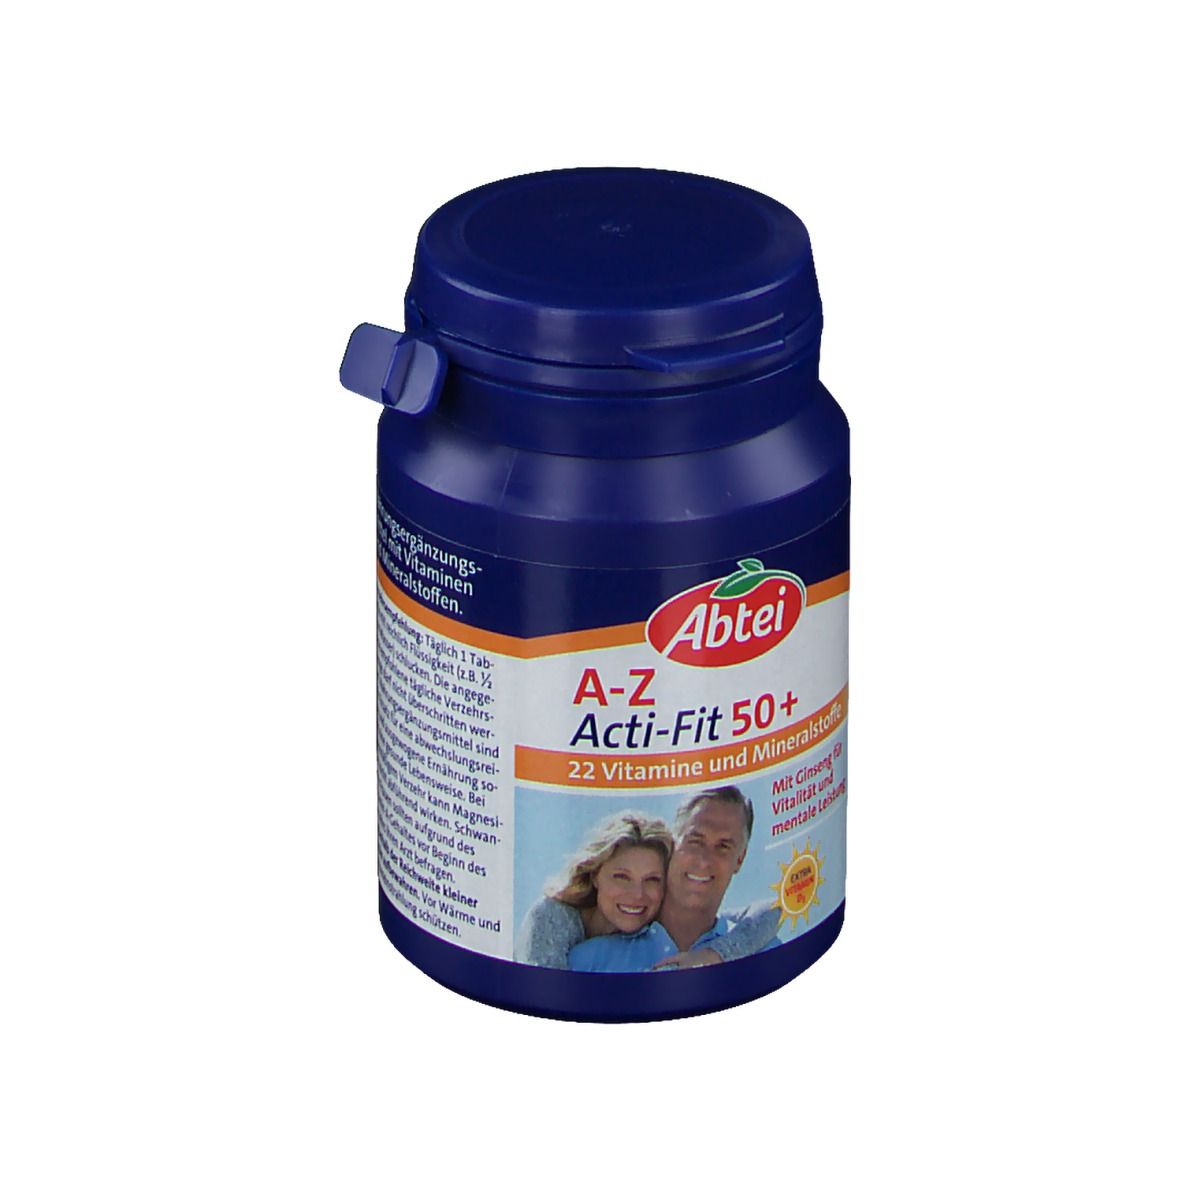 Abtei A-Z Acti-Fit 50+